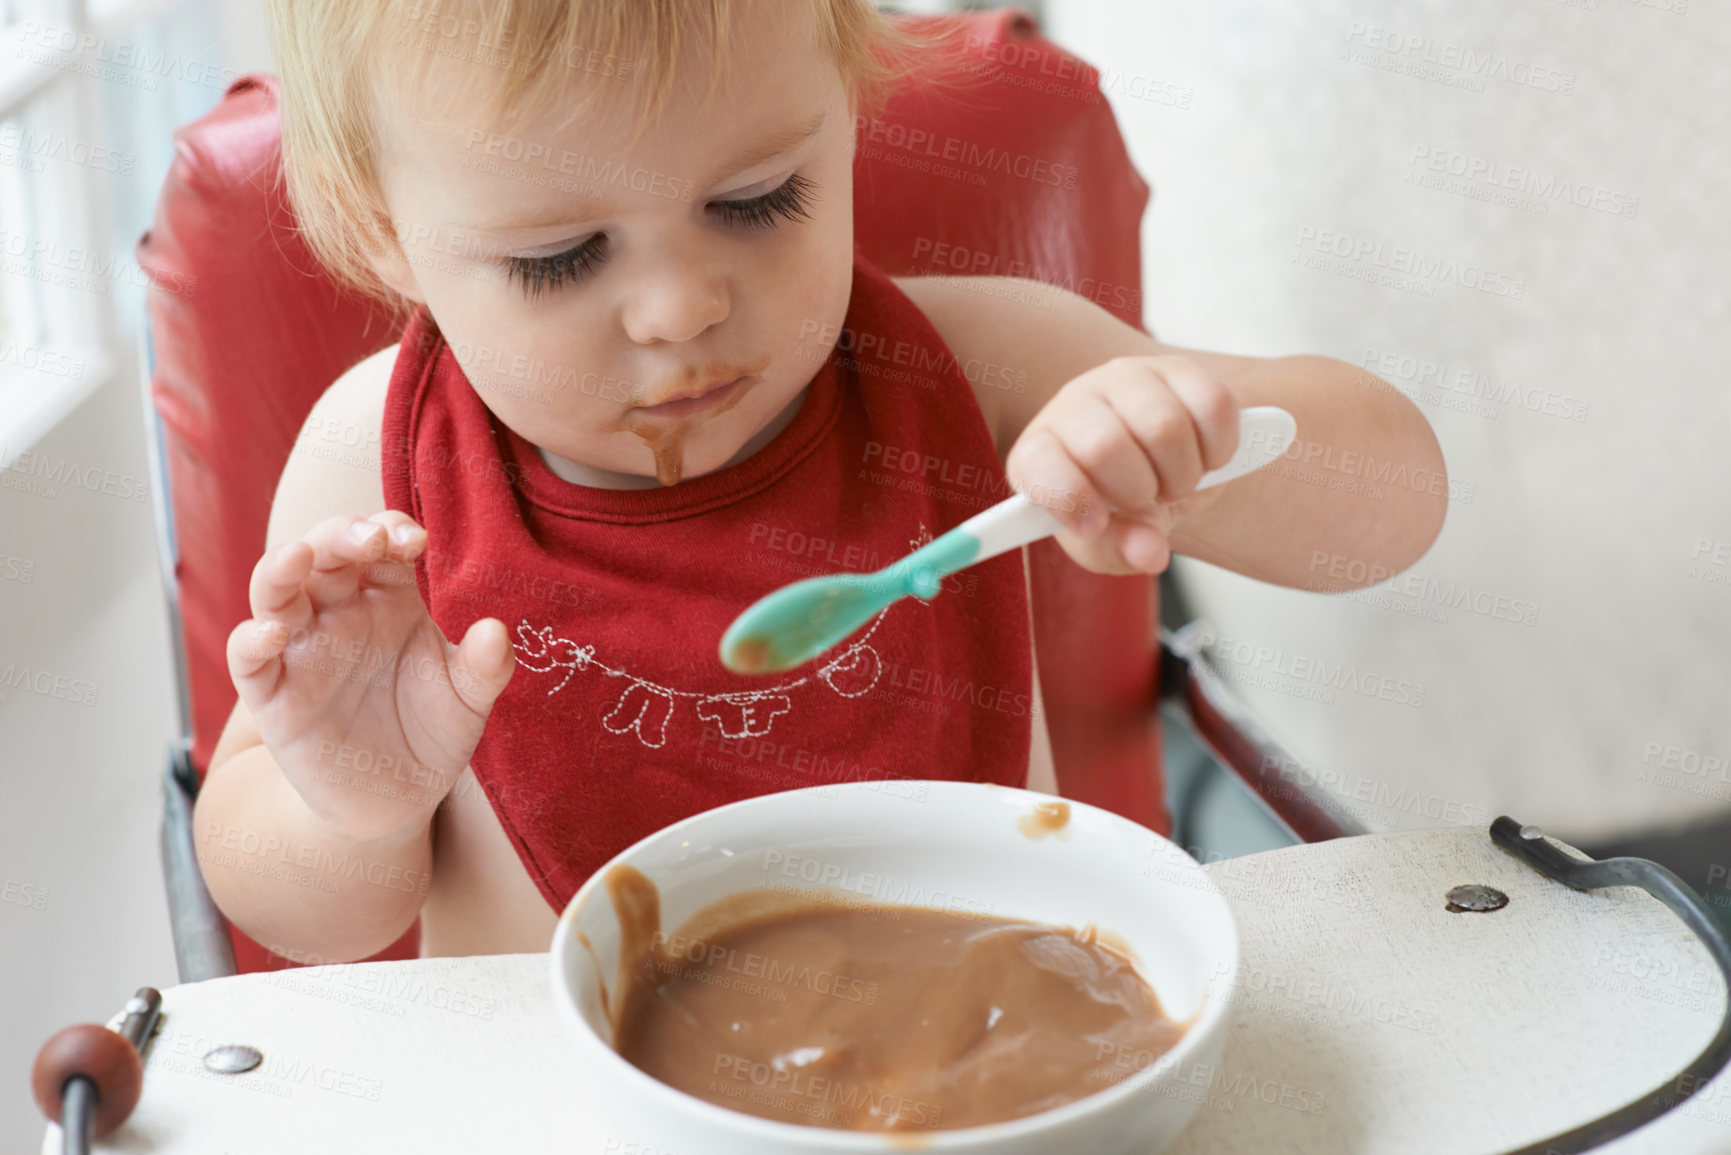 Buy stock photo High chair meal, baby and eating spoon in a house with diet, nutrition and child, wellness or  development. Food, messy eater and boy kid curious about breakfast cereal, playing or learning at home